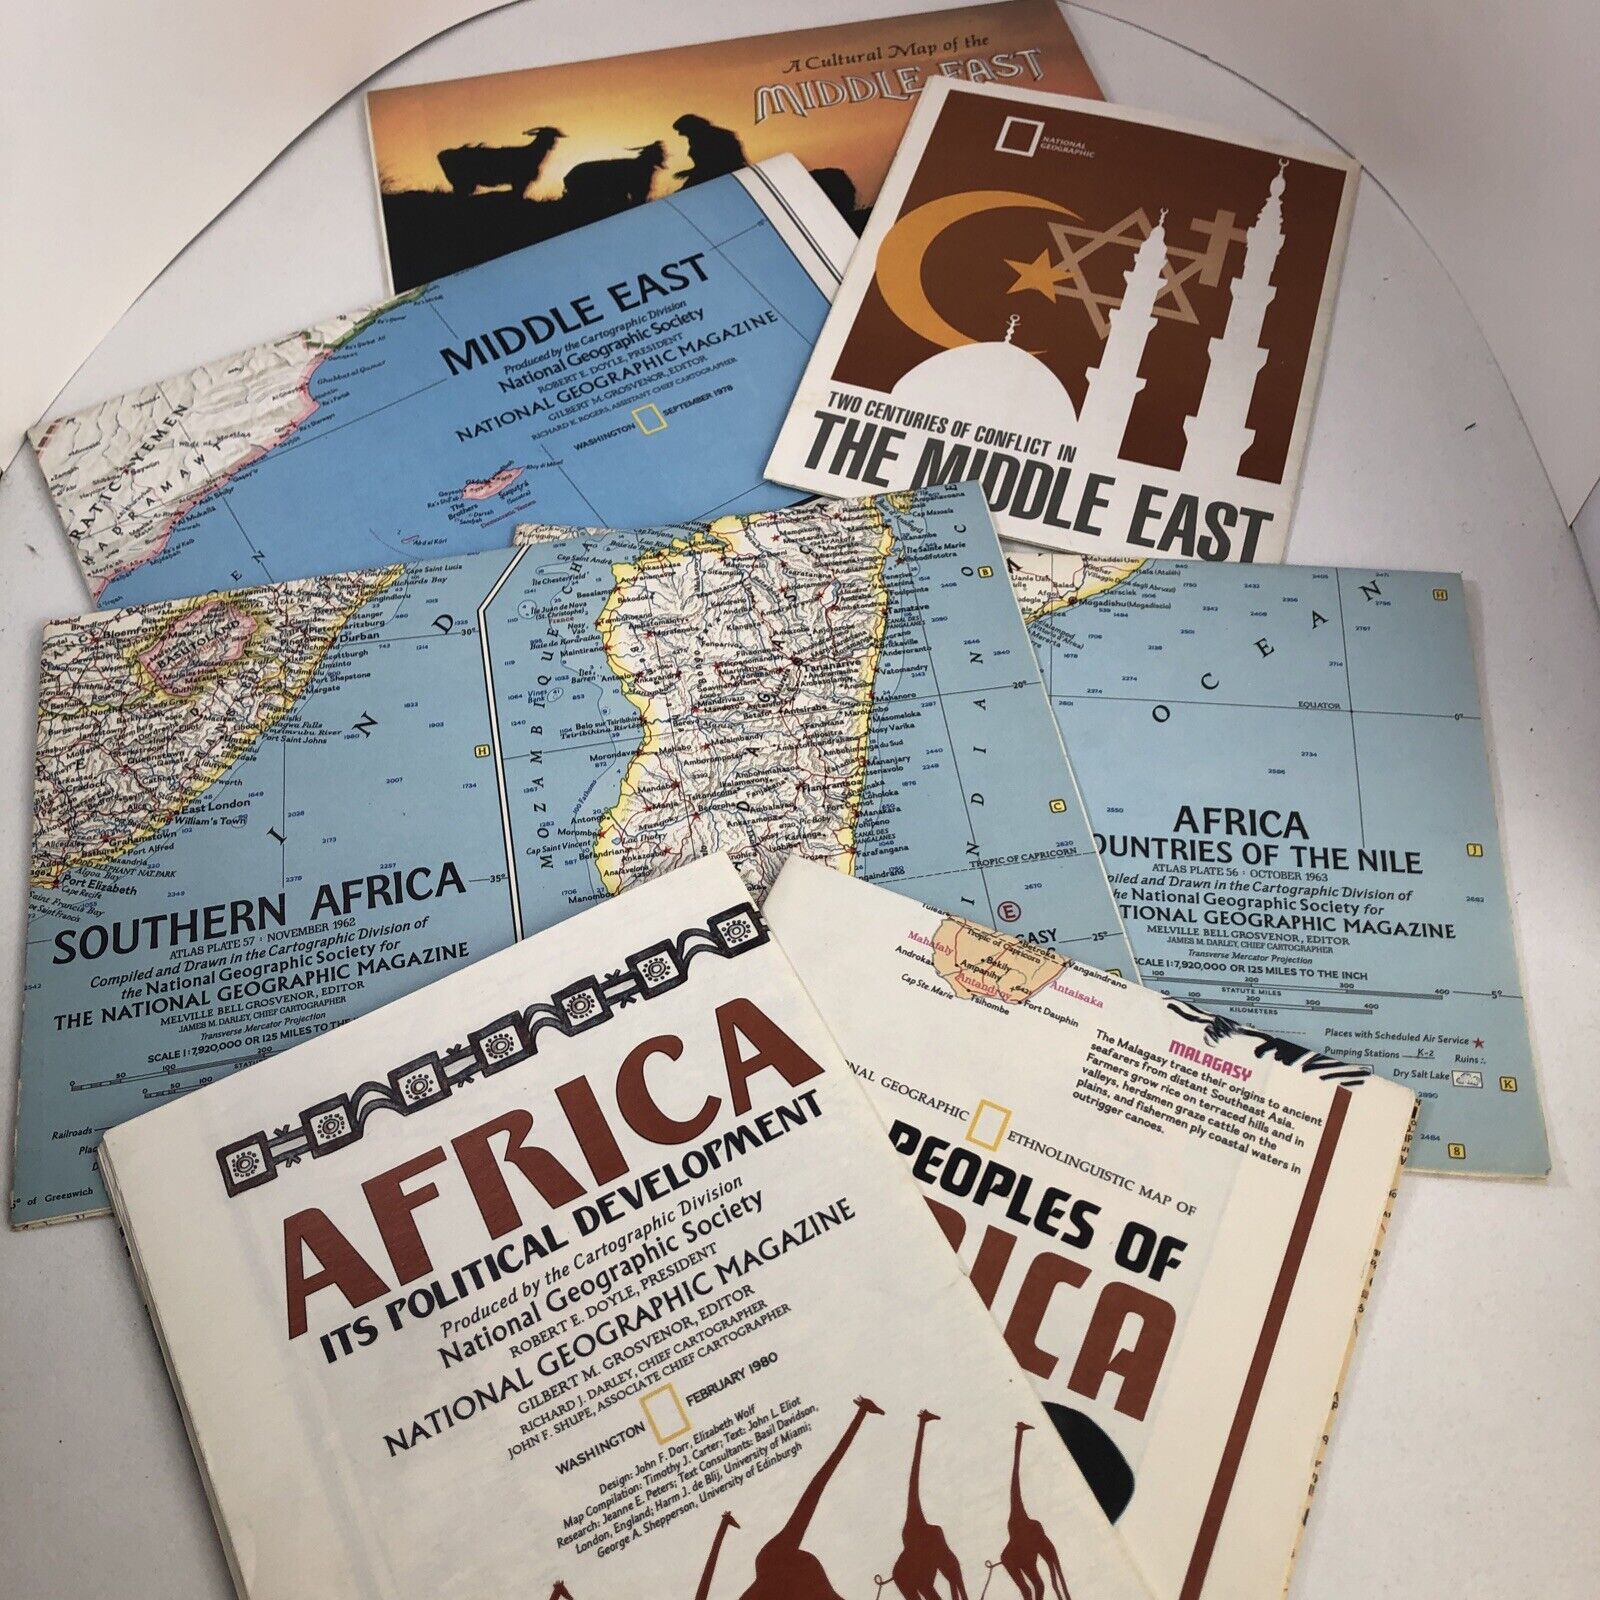 National Geographic People of Africa and the Middle East Poster Maps 1962 +